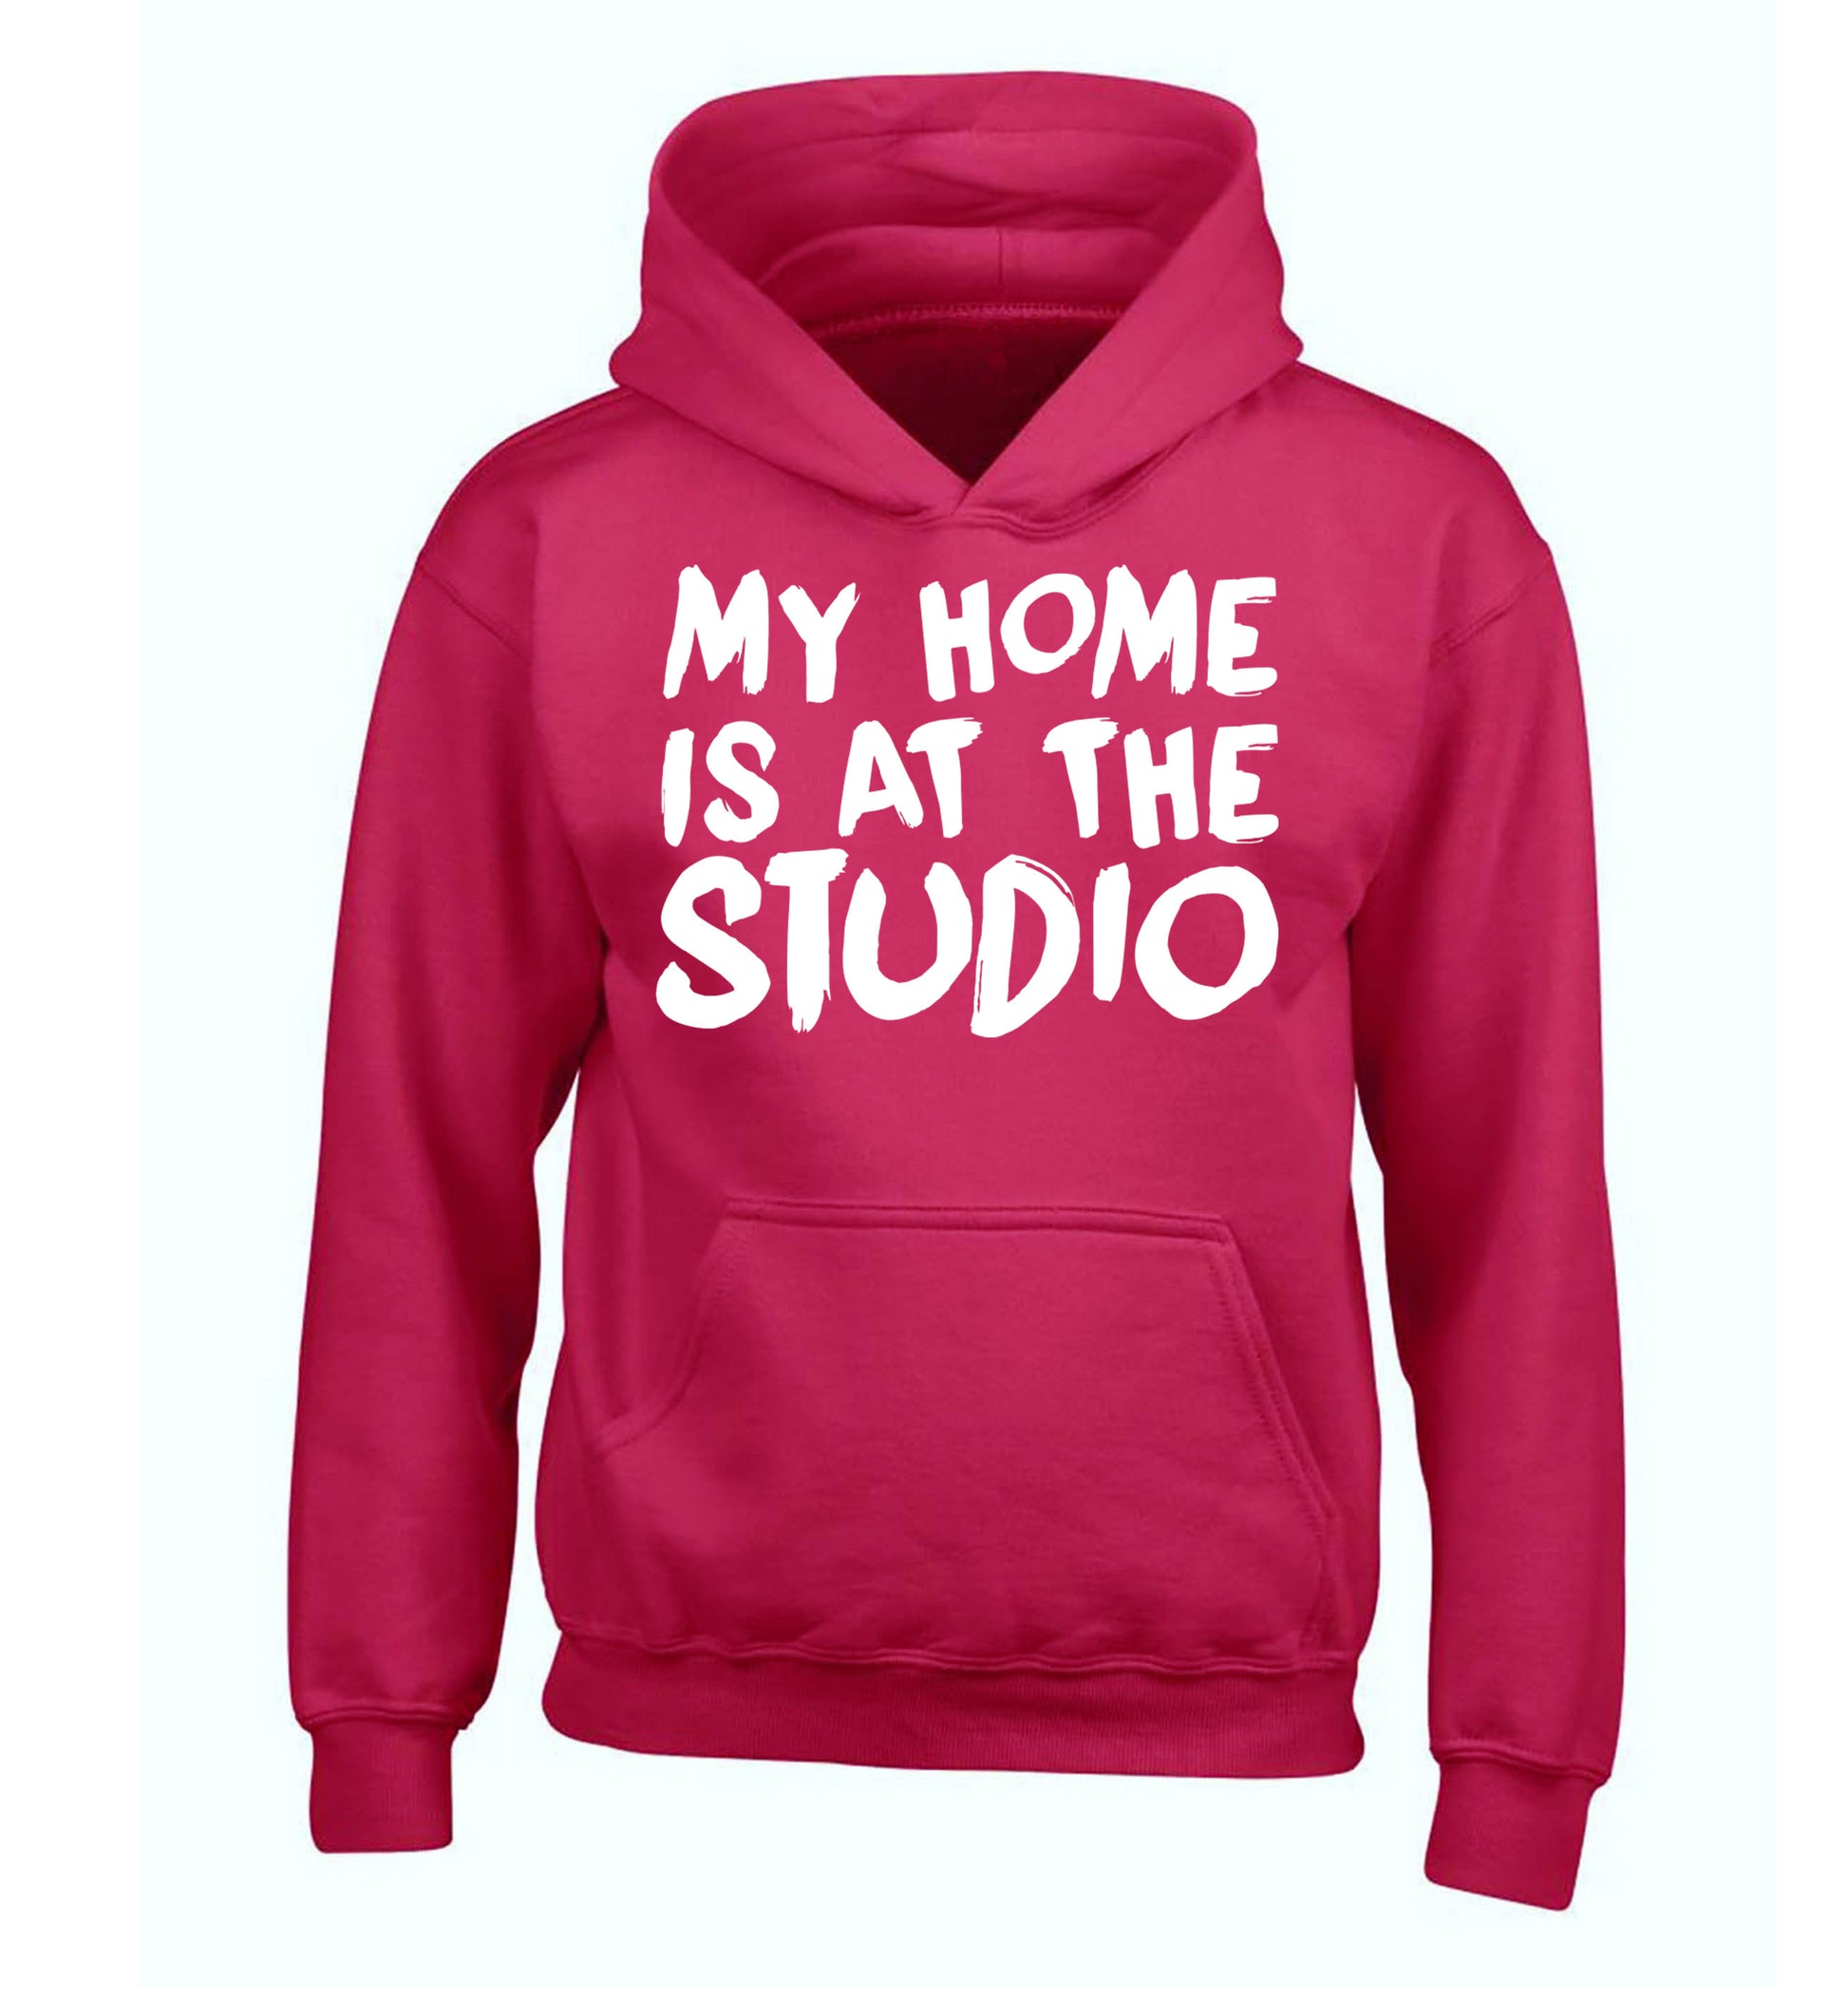 My home is at the studio children's pink hoodie 12-14 Years